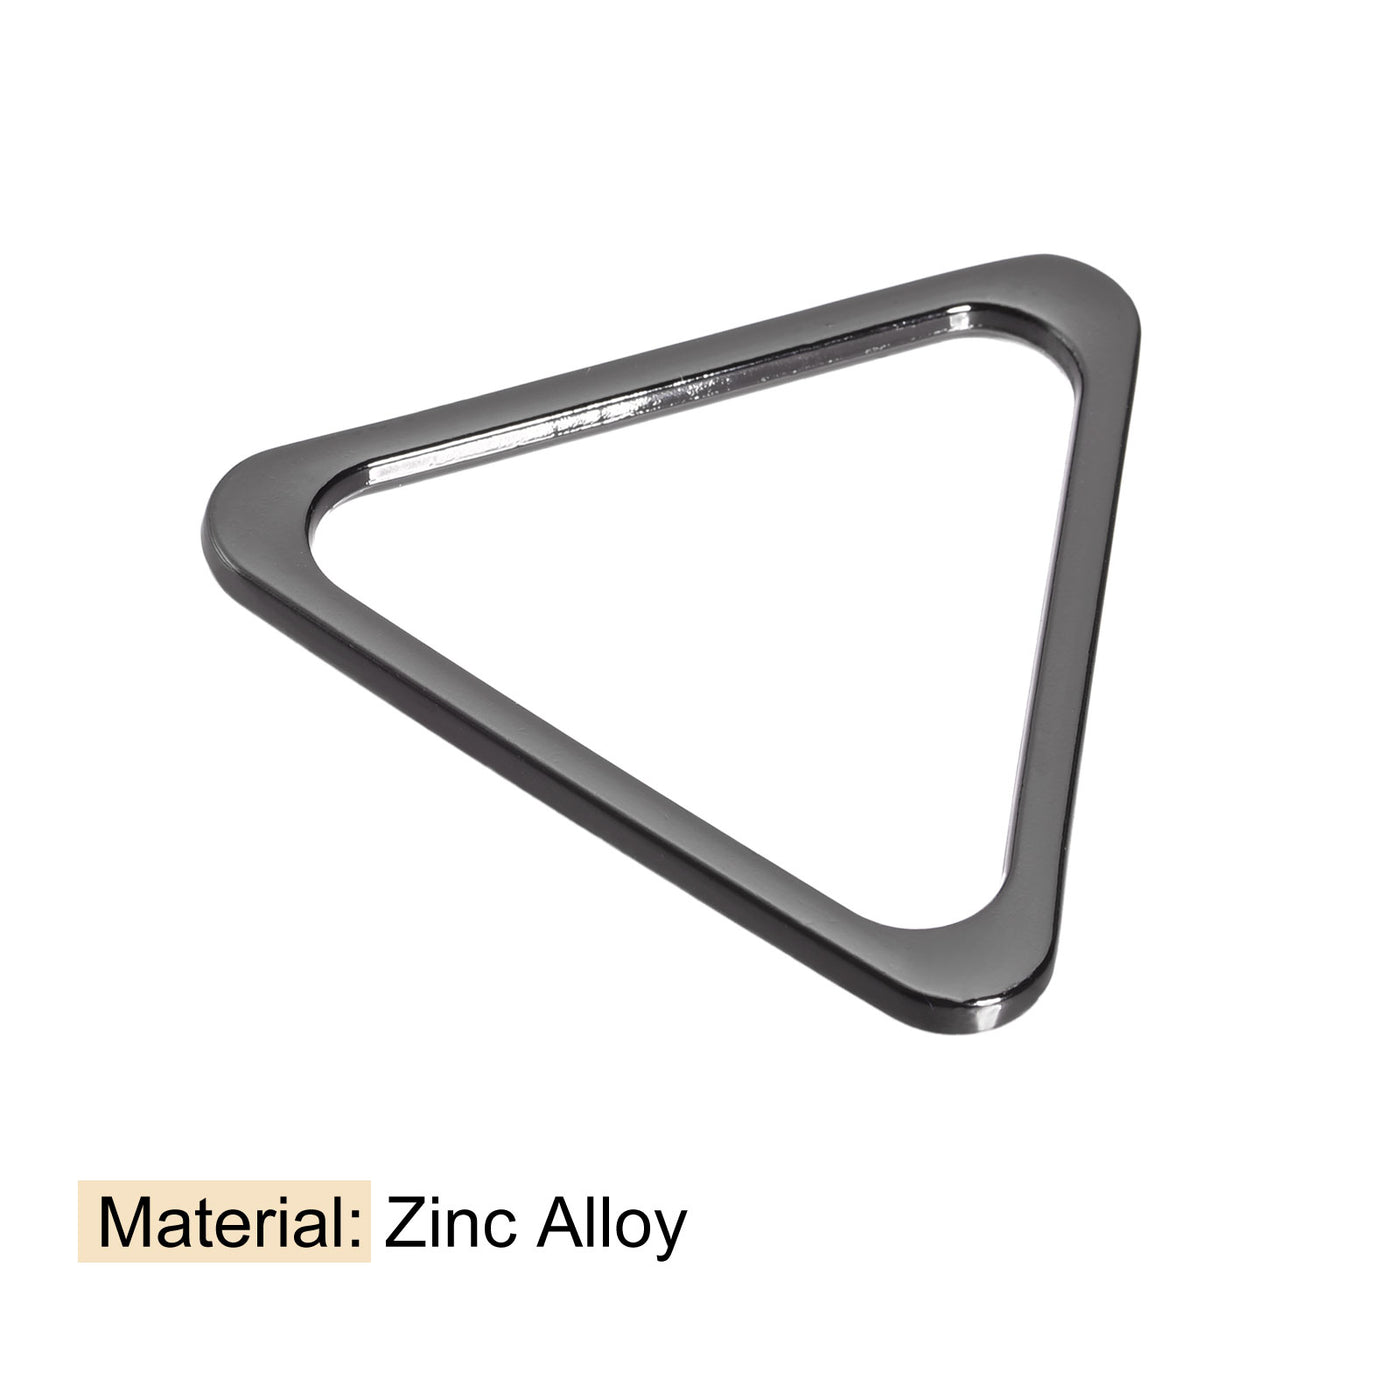 uxcell Uxcell Metal Triangle Ring Buckle 42mm(1.65") Inner Width for DIY Dark Gray 6pcs